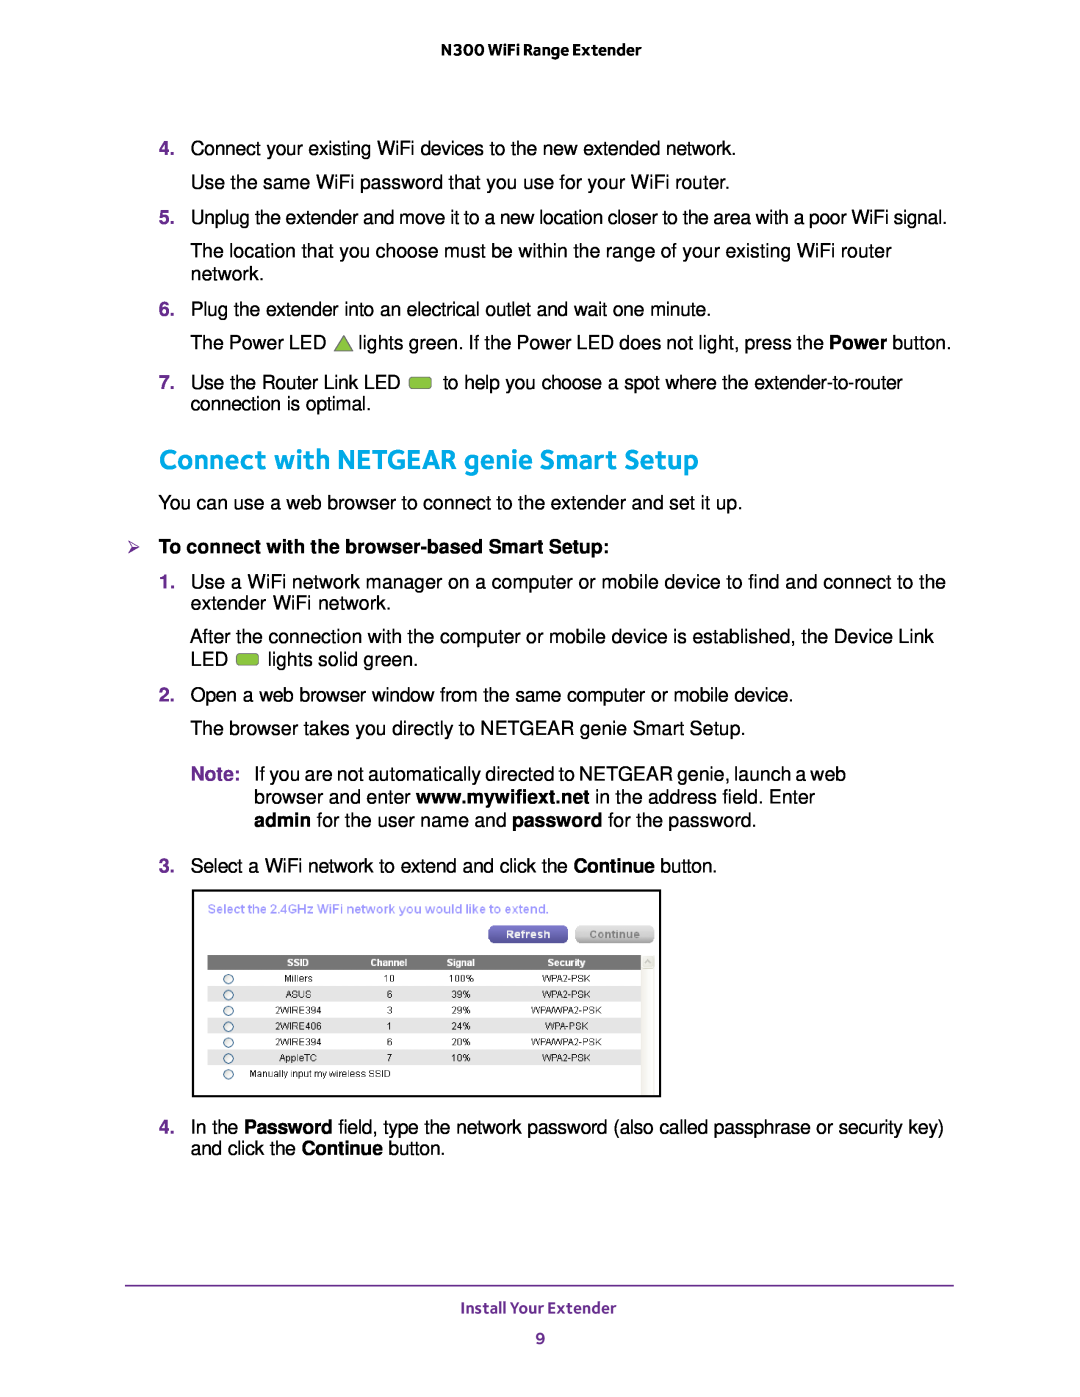 NETGEAR EX2700 user manual Connect with NETGEAR genie Smart Setup,  To connect with the browser-based Smart Setup 